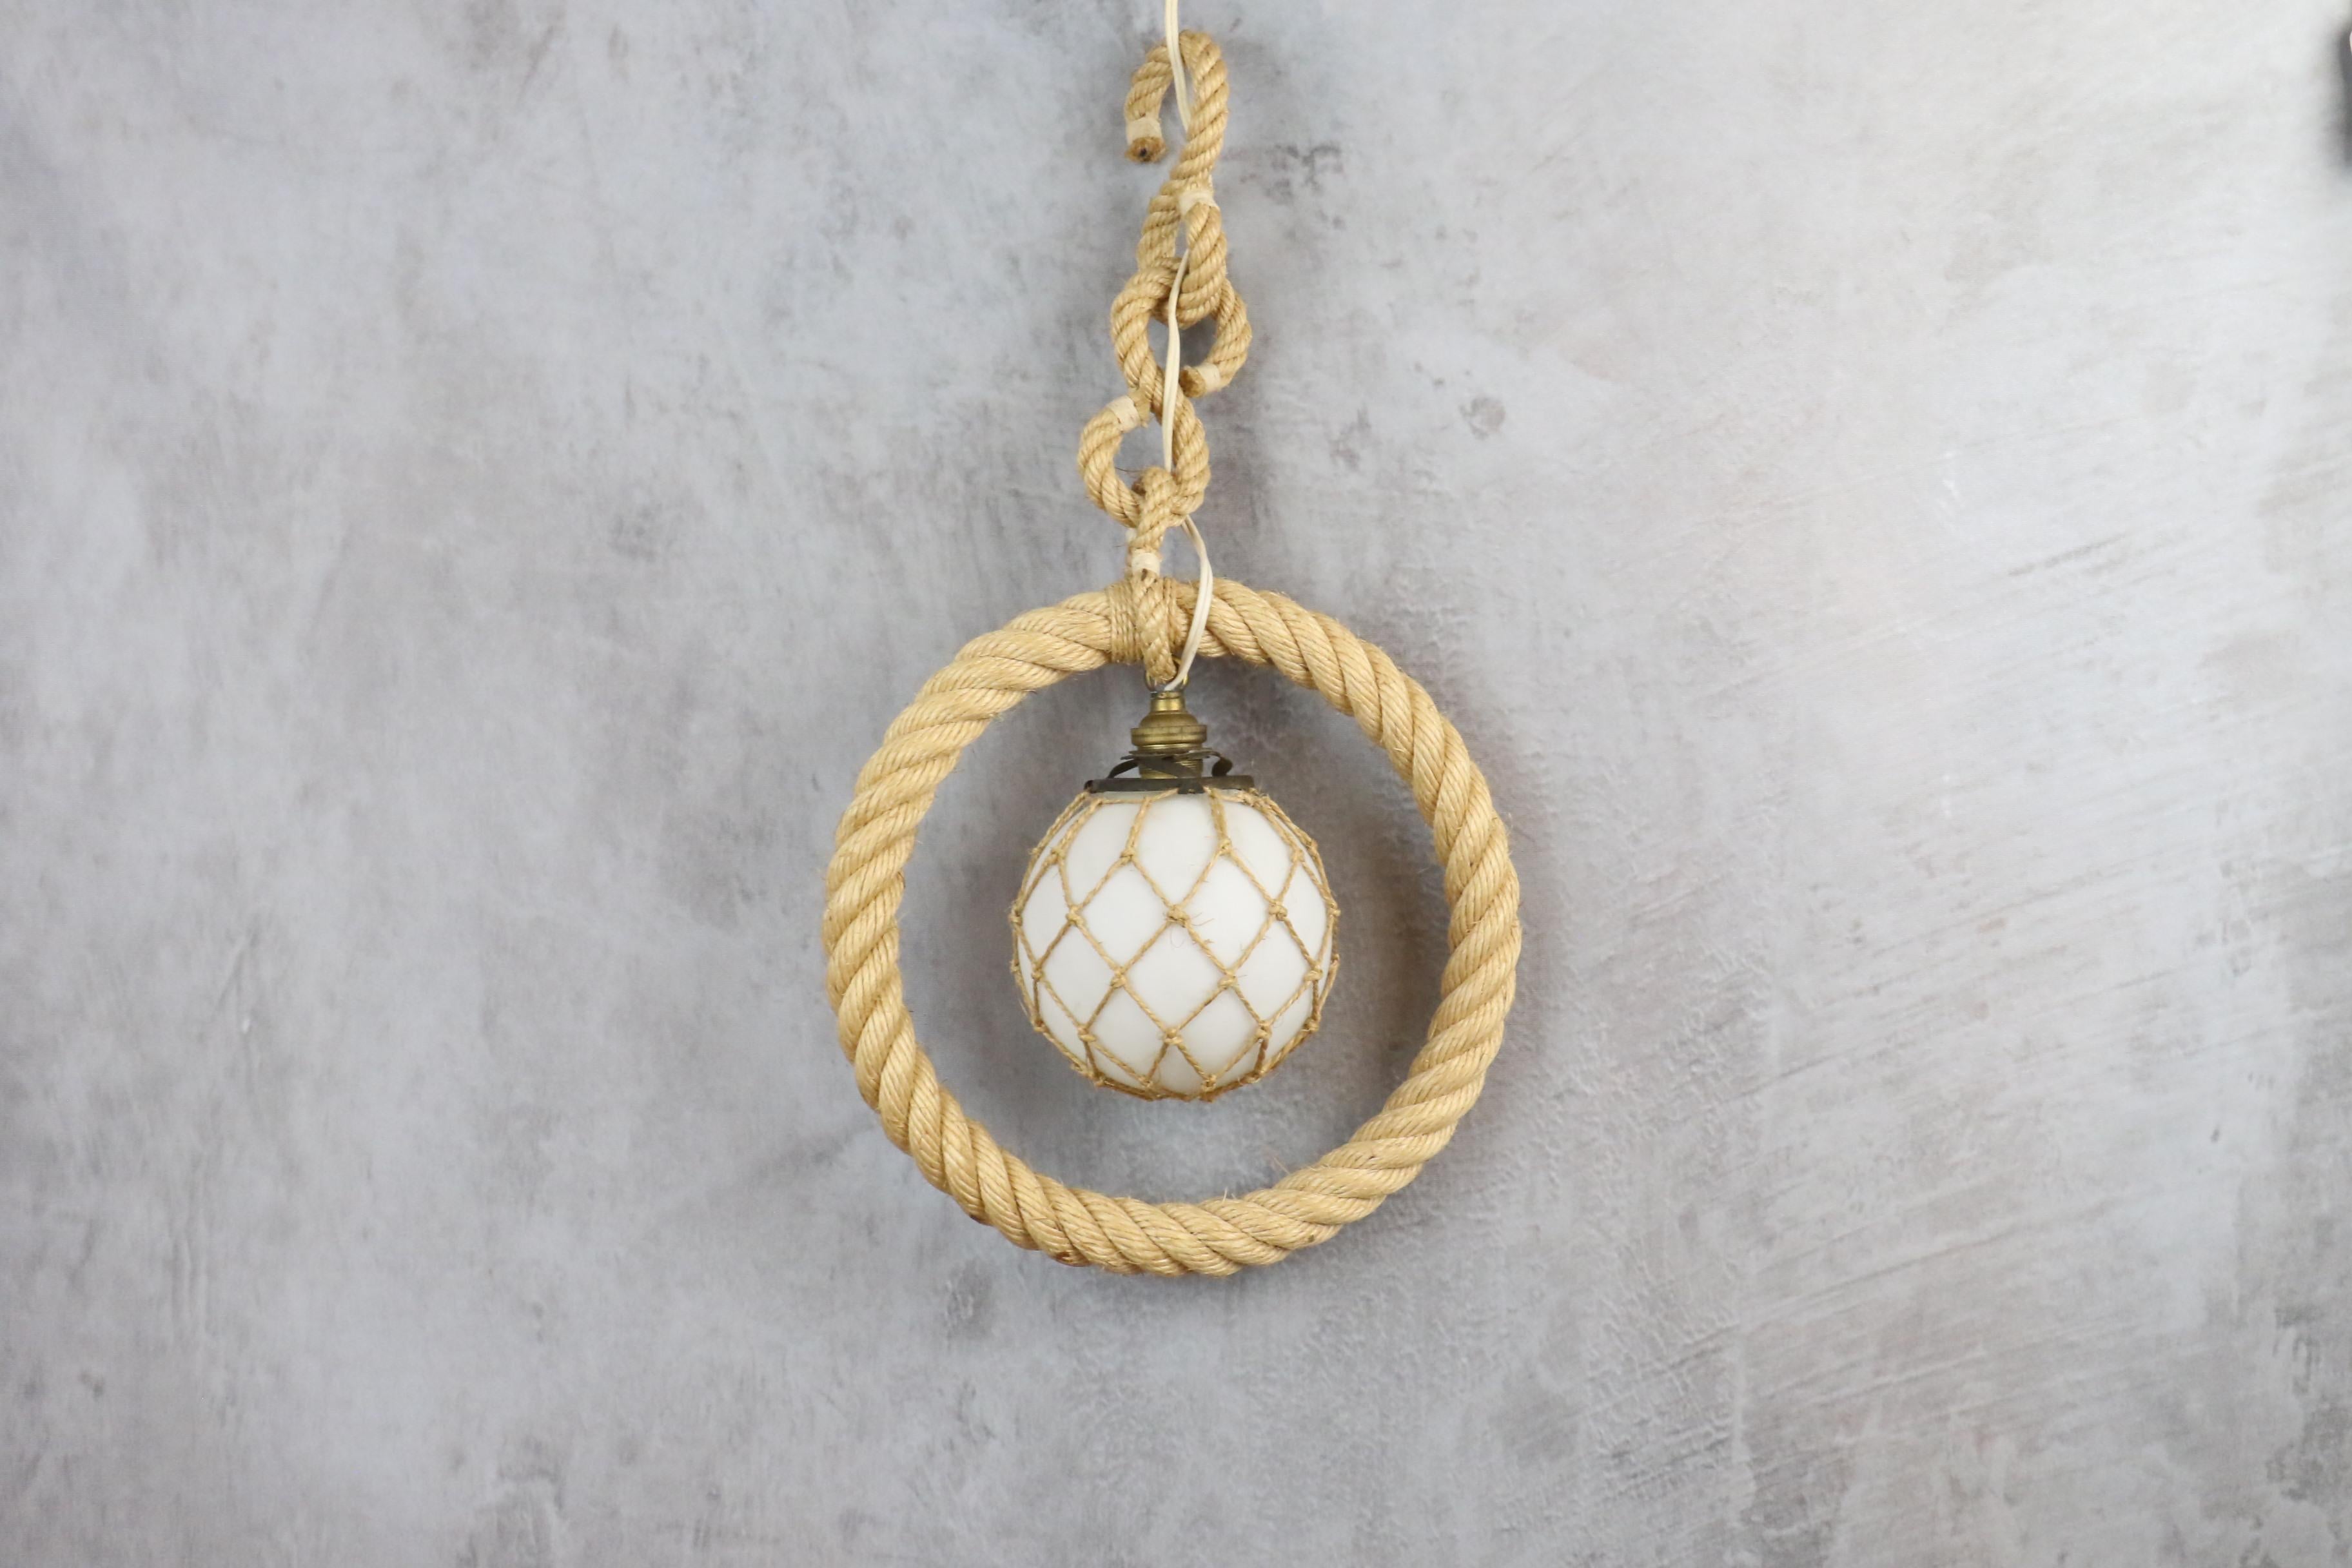 Midcentury Rope Chandelier by Adrien Audoux and Frida Minet, circa 1960

Rare chandelier lamp by the French and Swiss designers Adrien Audoux and Frida Minet. This model is really rare.
The light produced by the opaline globe is very warm. This